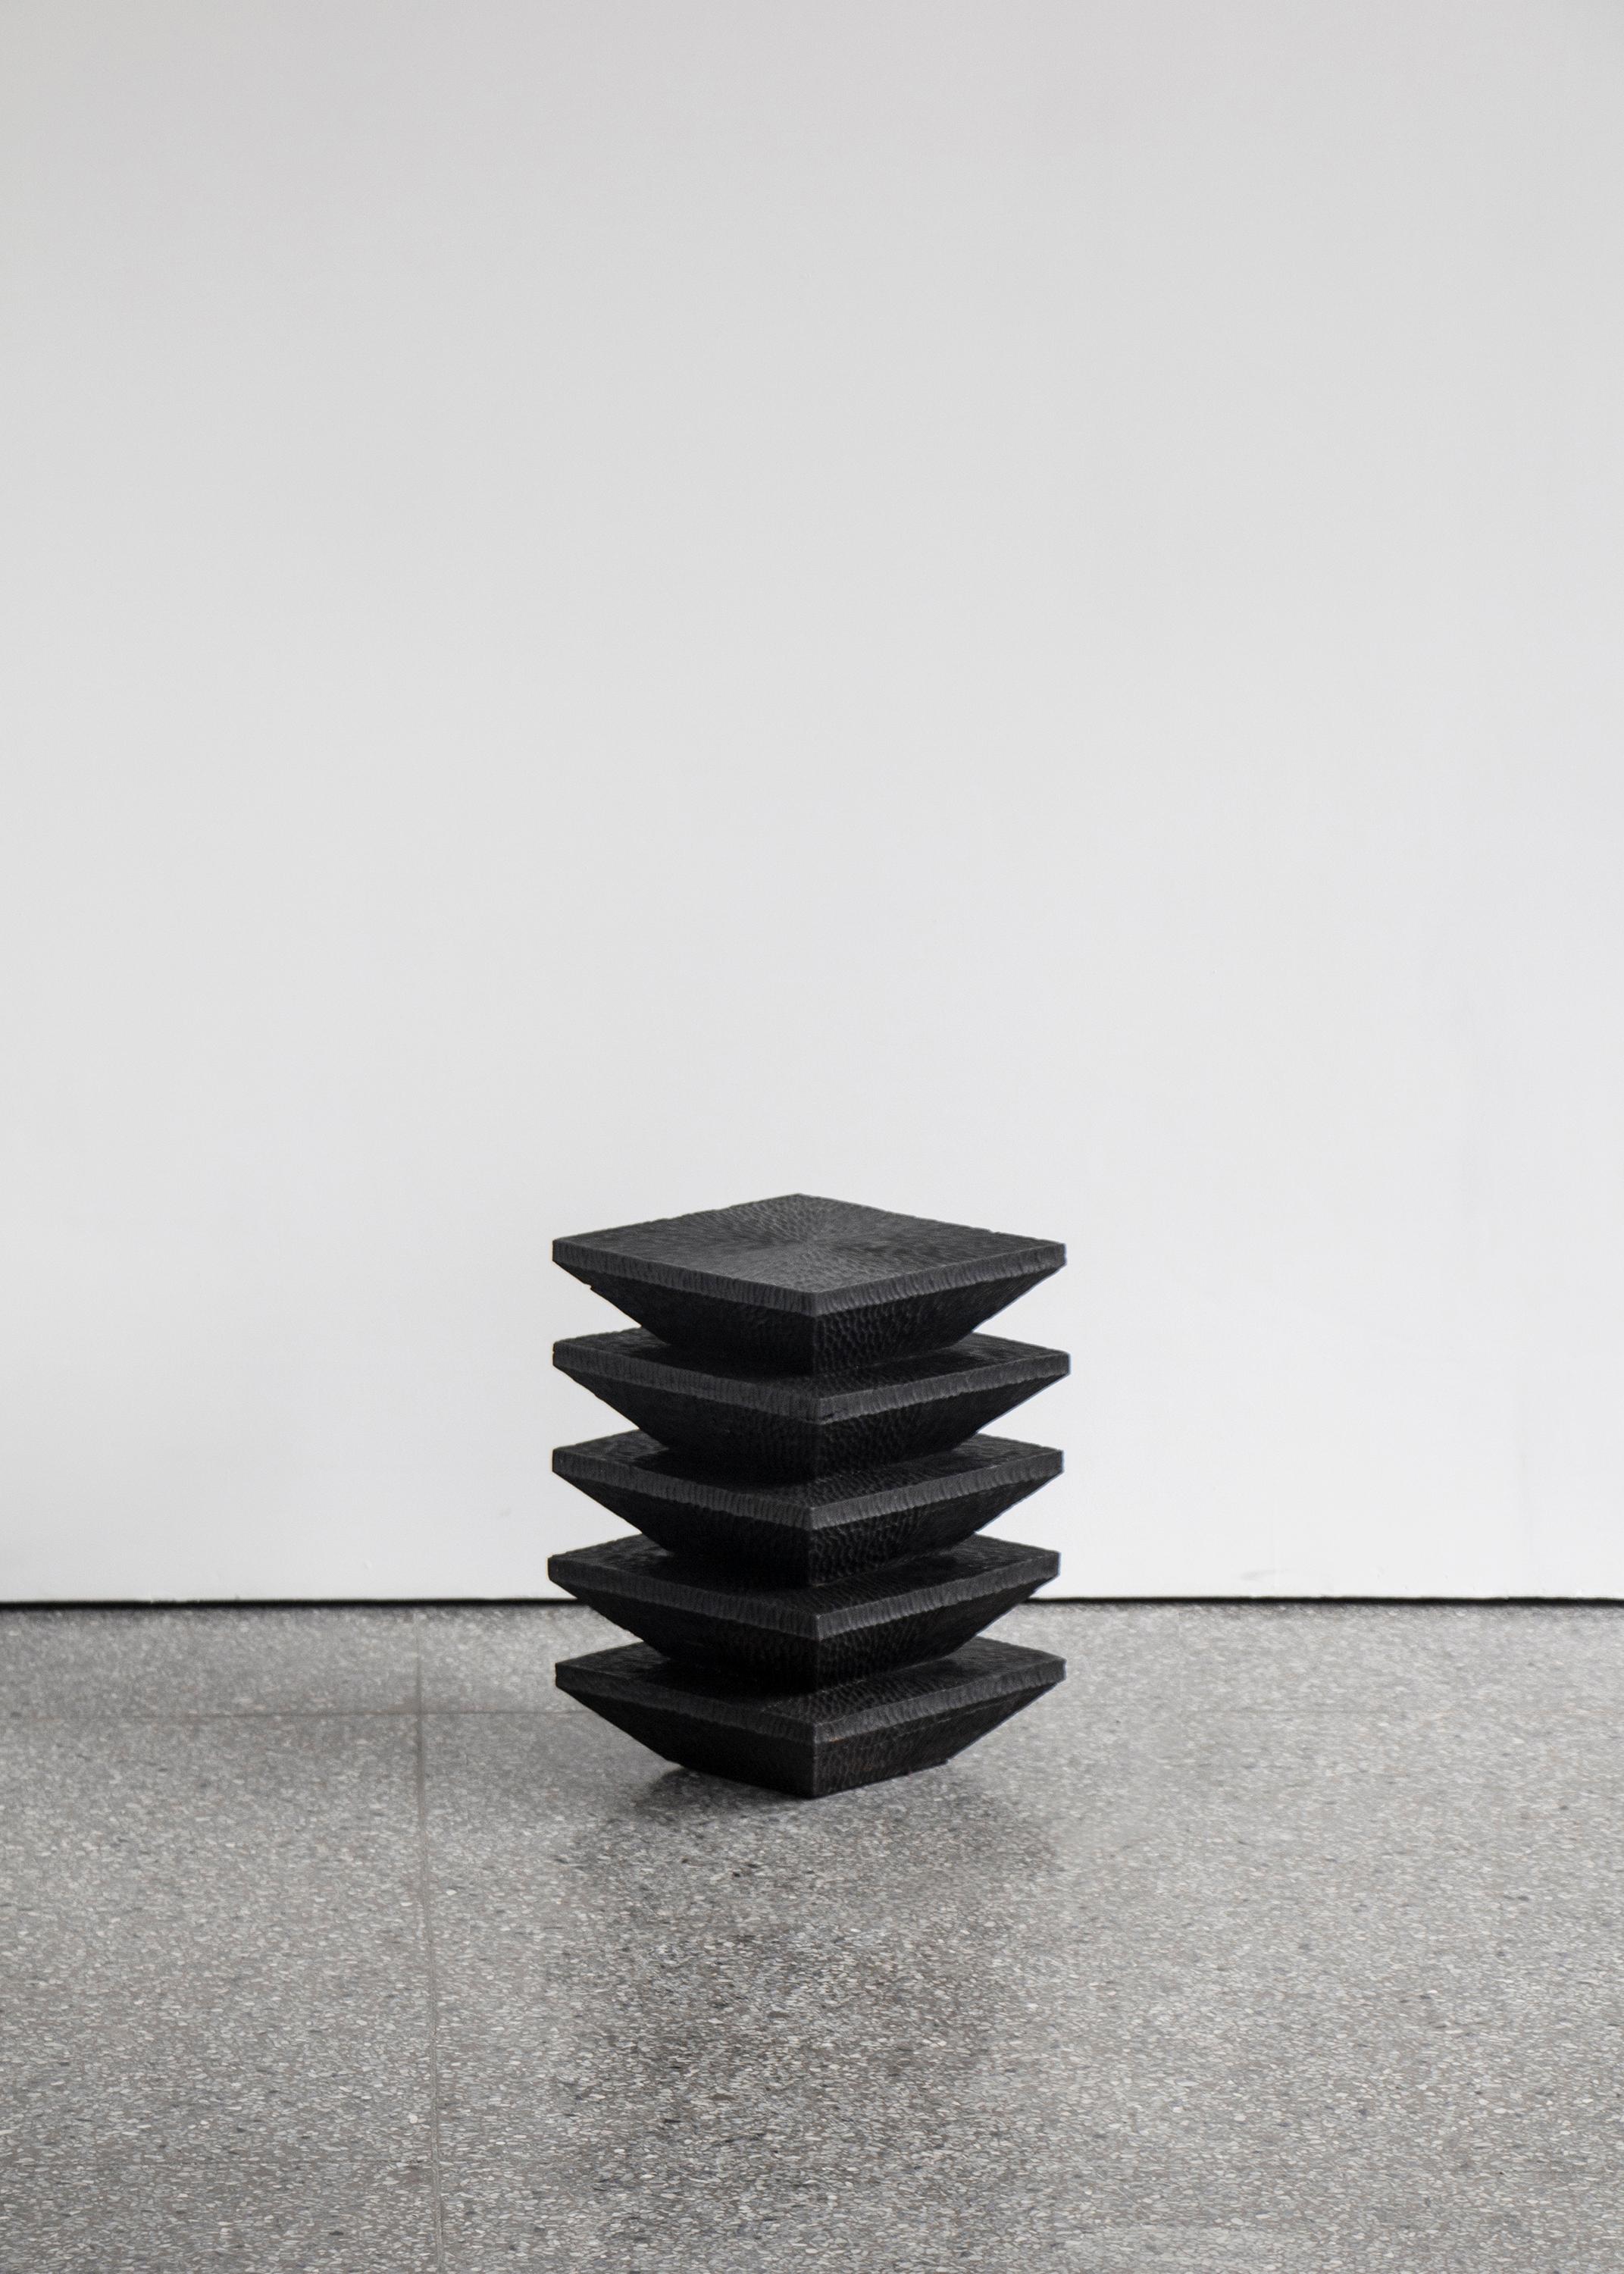 Epang 07 side table by Sing Chan
Dimensions: W 25 x D 25 x H 52.5 cm
Materials: Manual sculpture, teak, black paint, waxing

Sing Chan ( Chinese: 陈星宇/Xingyu Chen) , the founder of SINGCHAN DESIGN, was born in 1990, and graduated from the Department